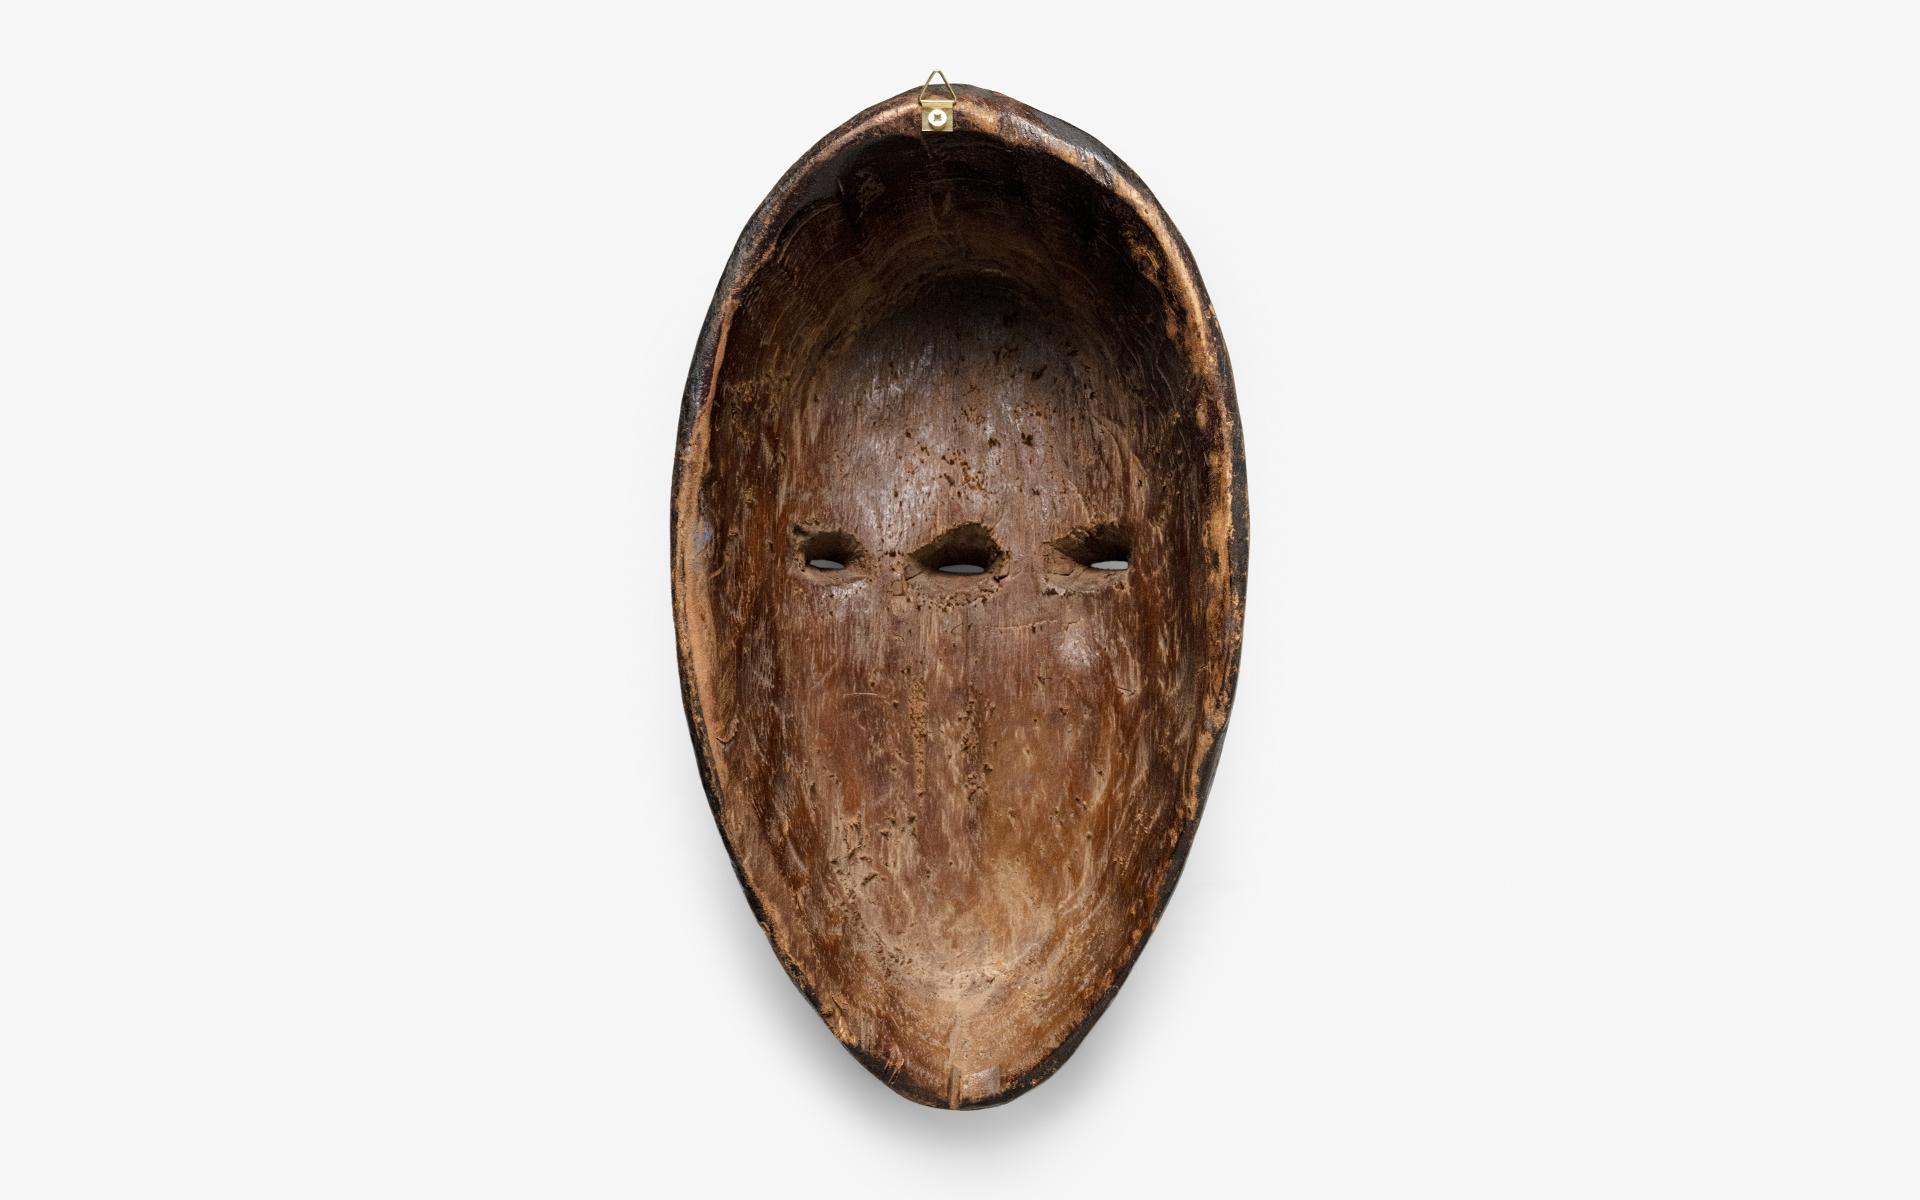  A unique mask, handmade by artisans in the Punu region of Gabon. This mask has been crafted using wood carving techniques and adorned with polychrome tempera paint, giving it a distinct and one-of-a-kind appearance. It stands as a collector's